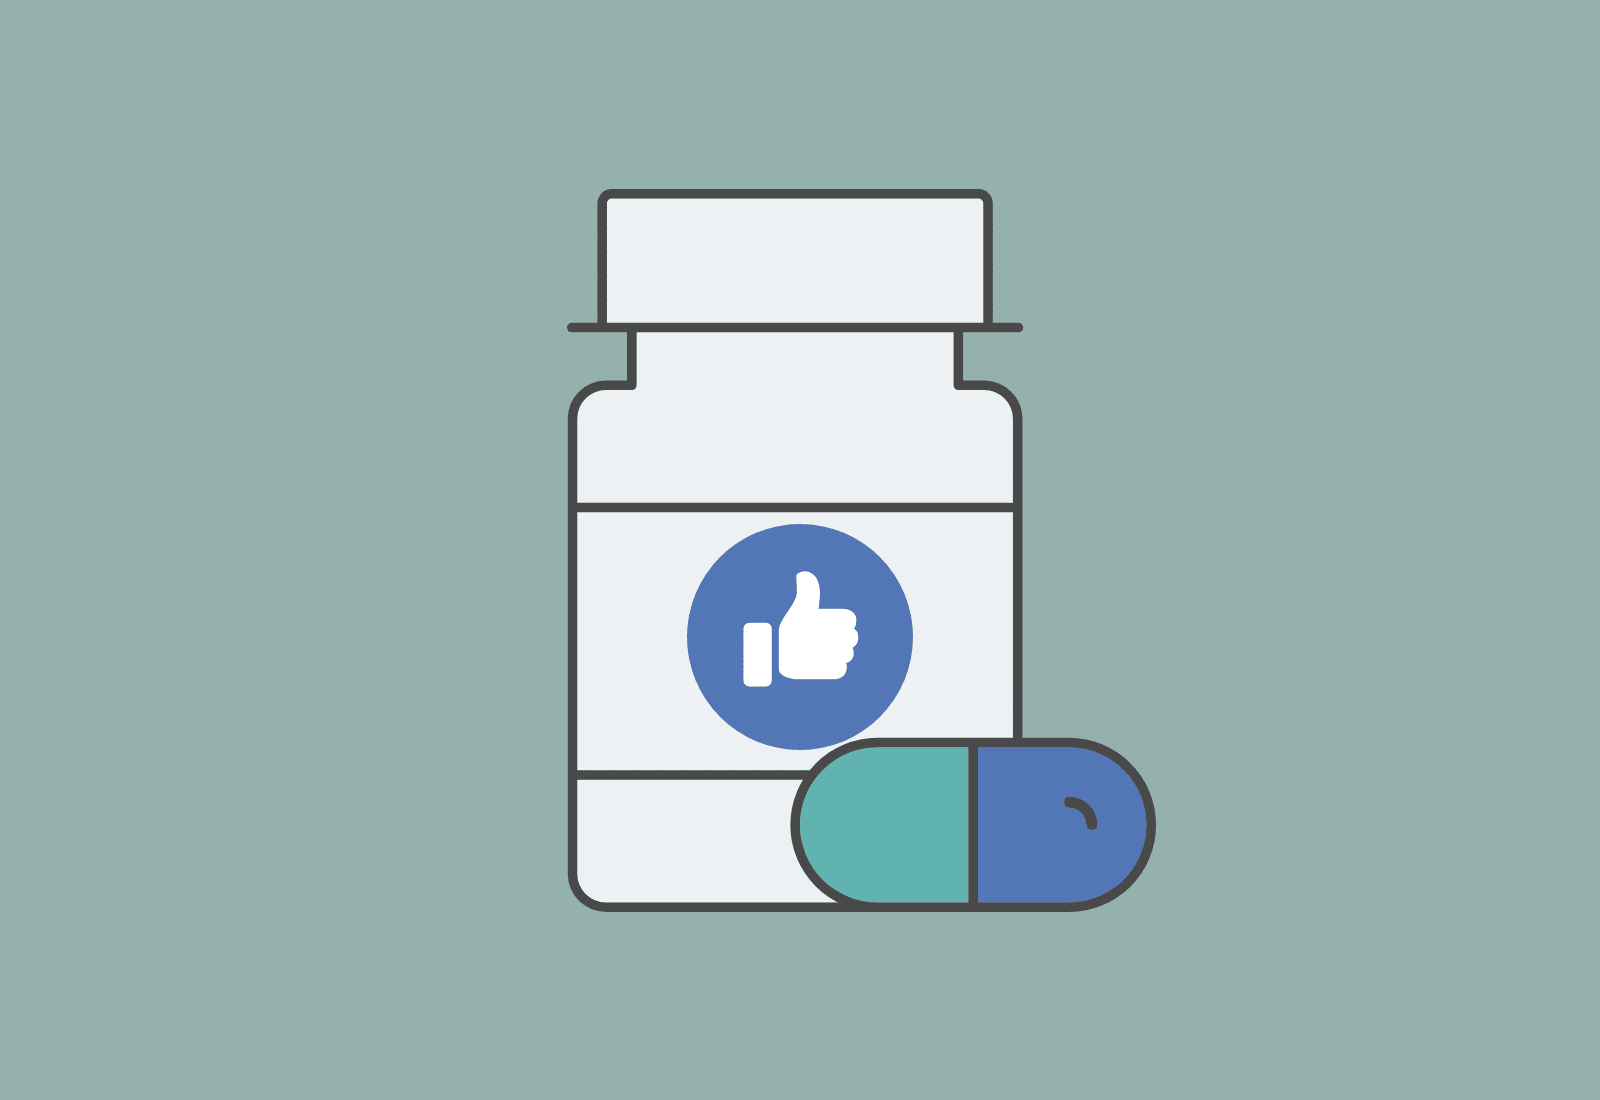 graphic of rx bottle with facebook thumbs up on the label